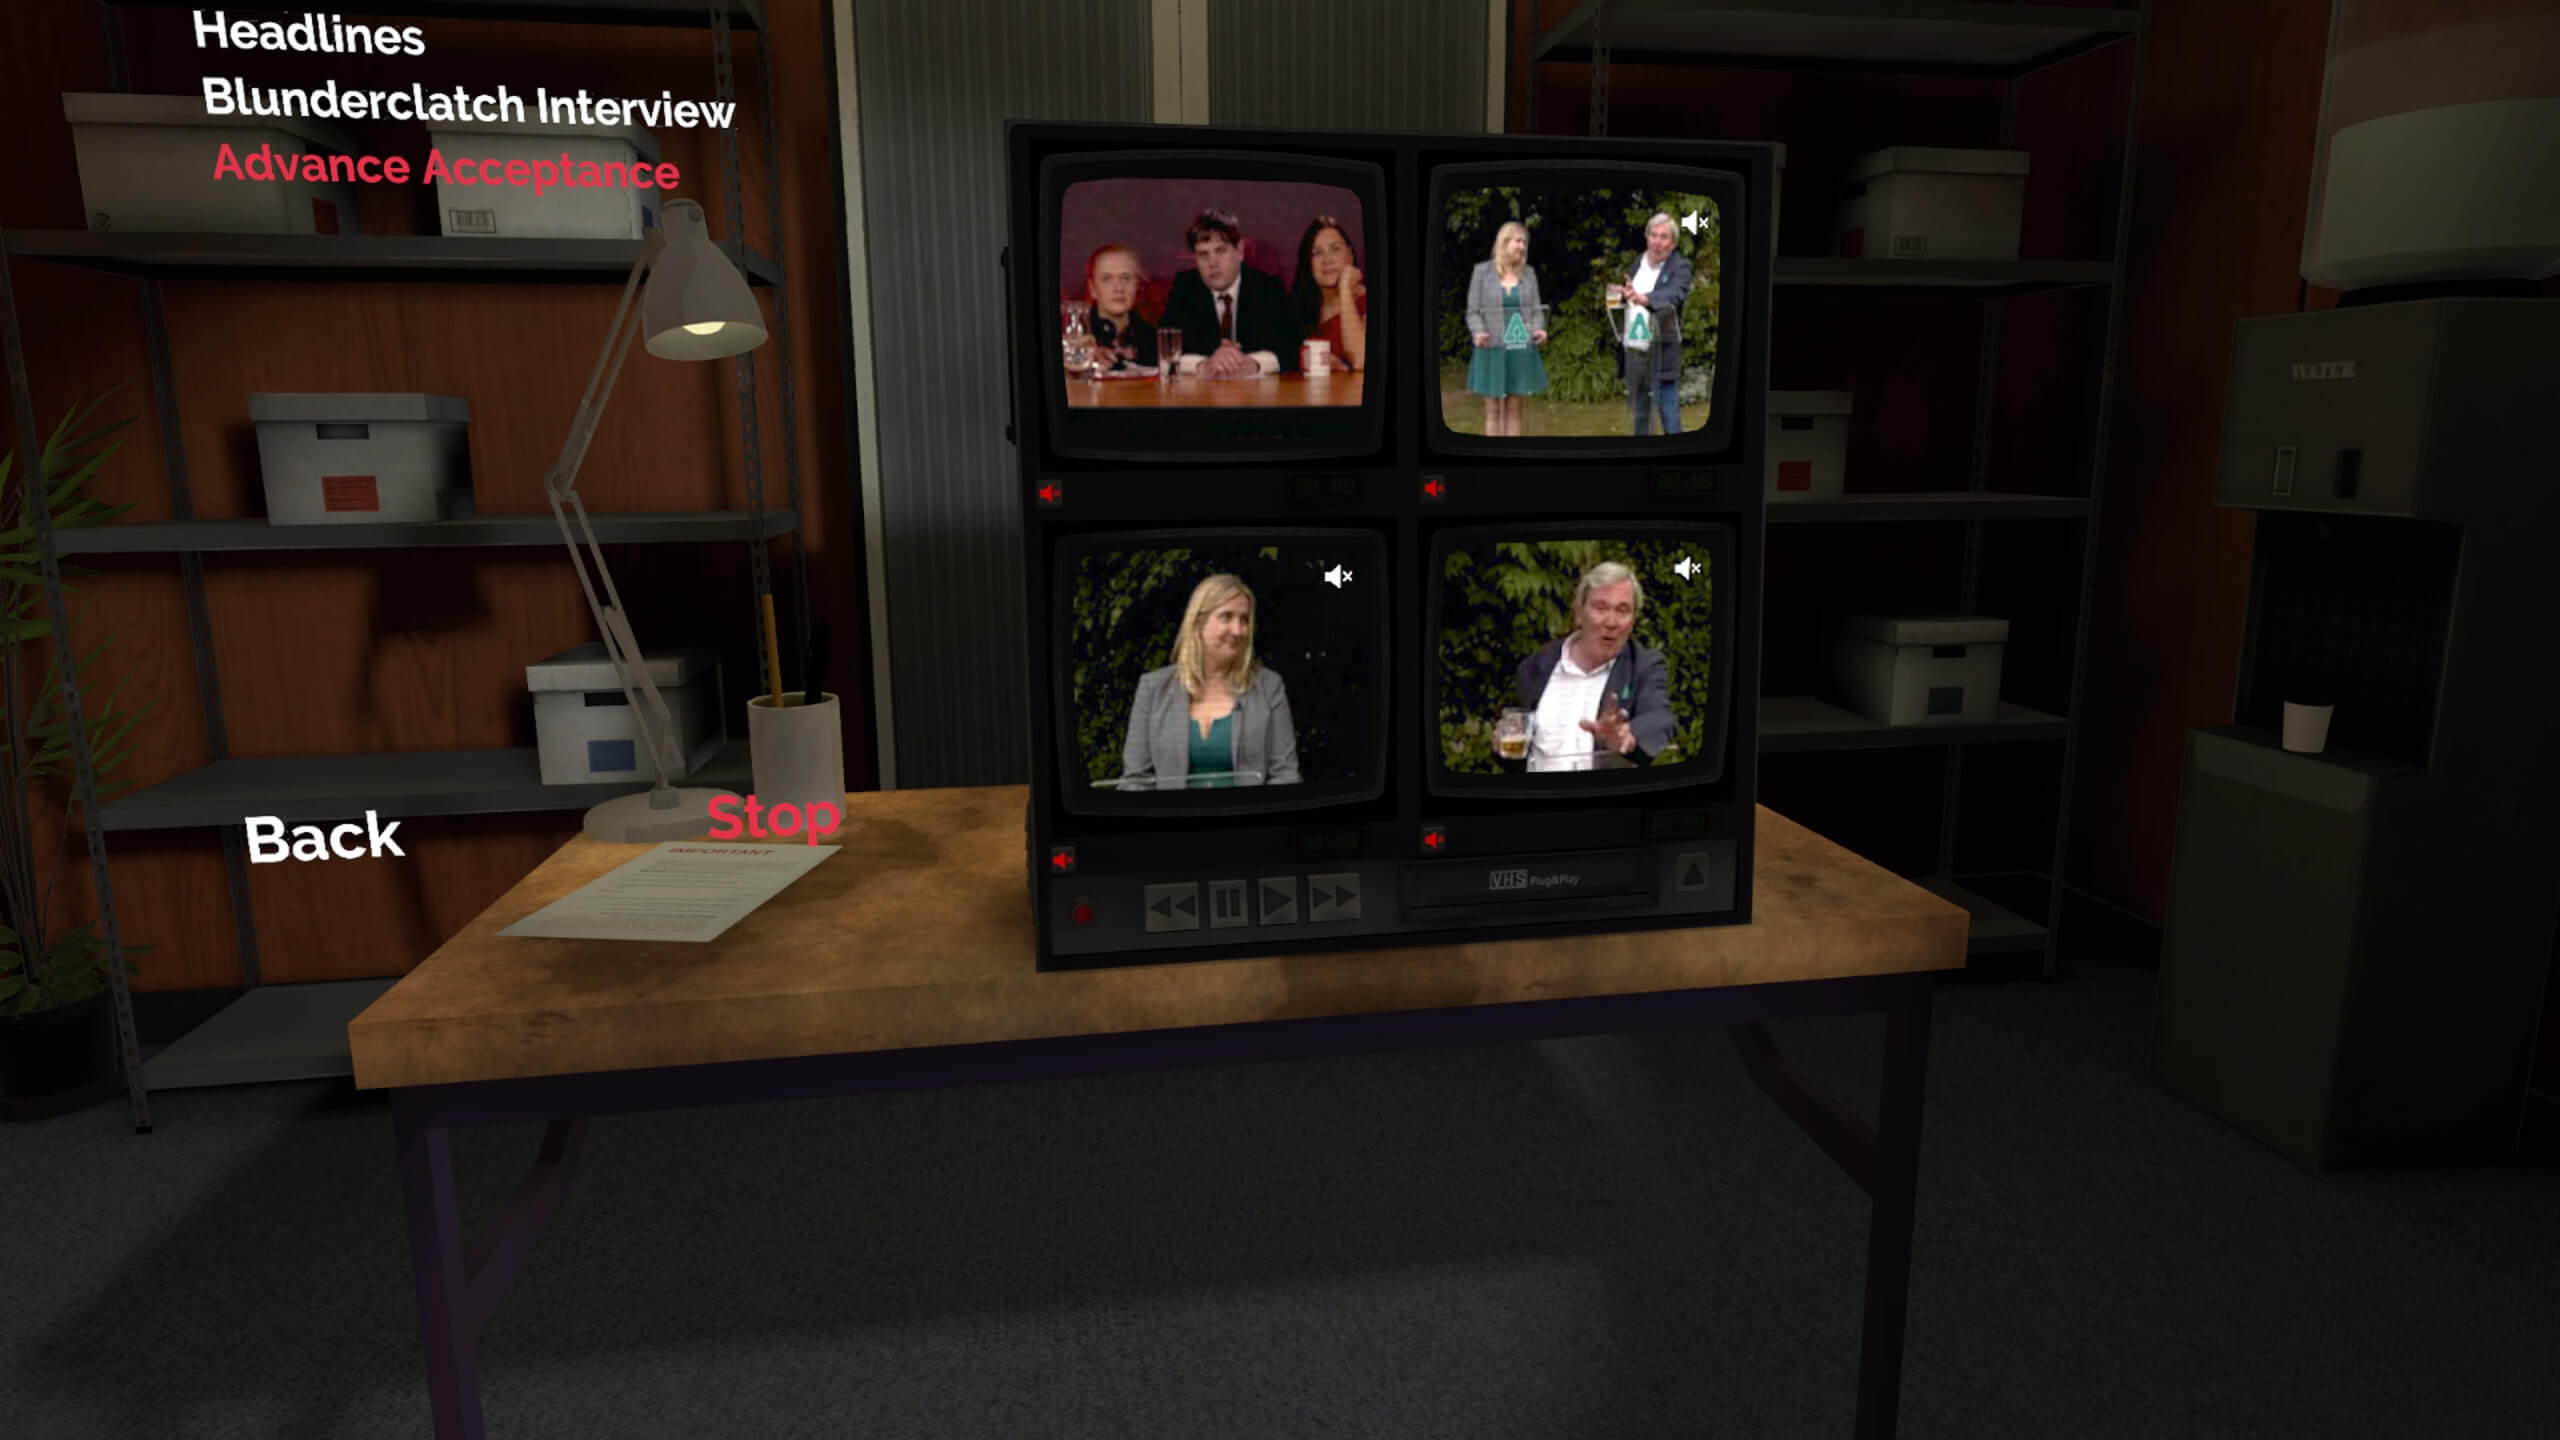 the in game replay mode showing four screens all with different broadcasts on display. Top left shows a news presenter and the remaining three screens show different angles of two government members having an acceptance speech. The left side of the image shows an option to switch between chapters on the day.